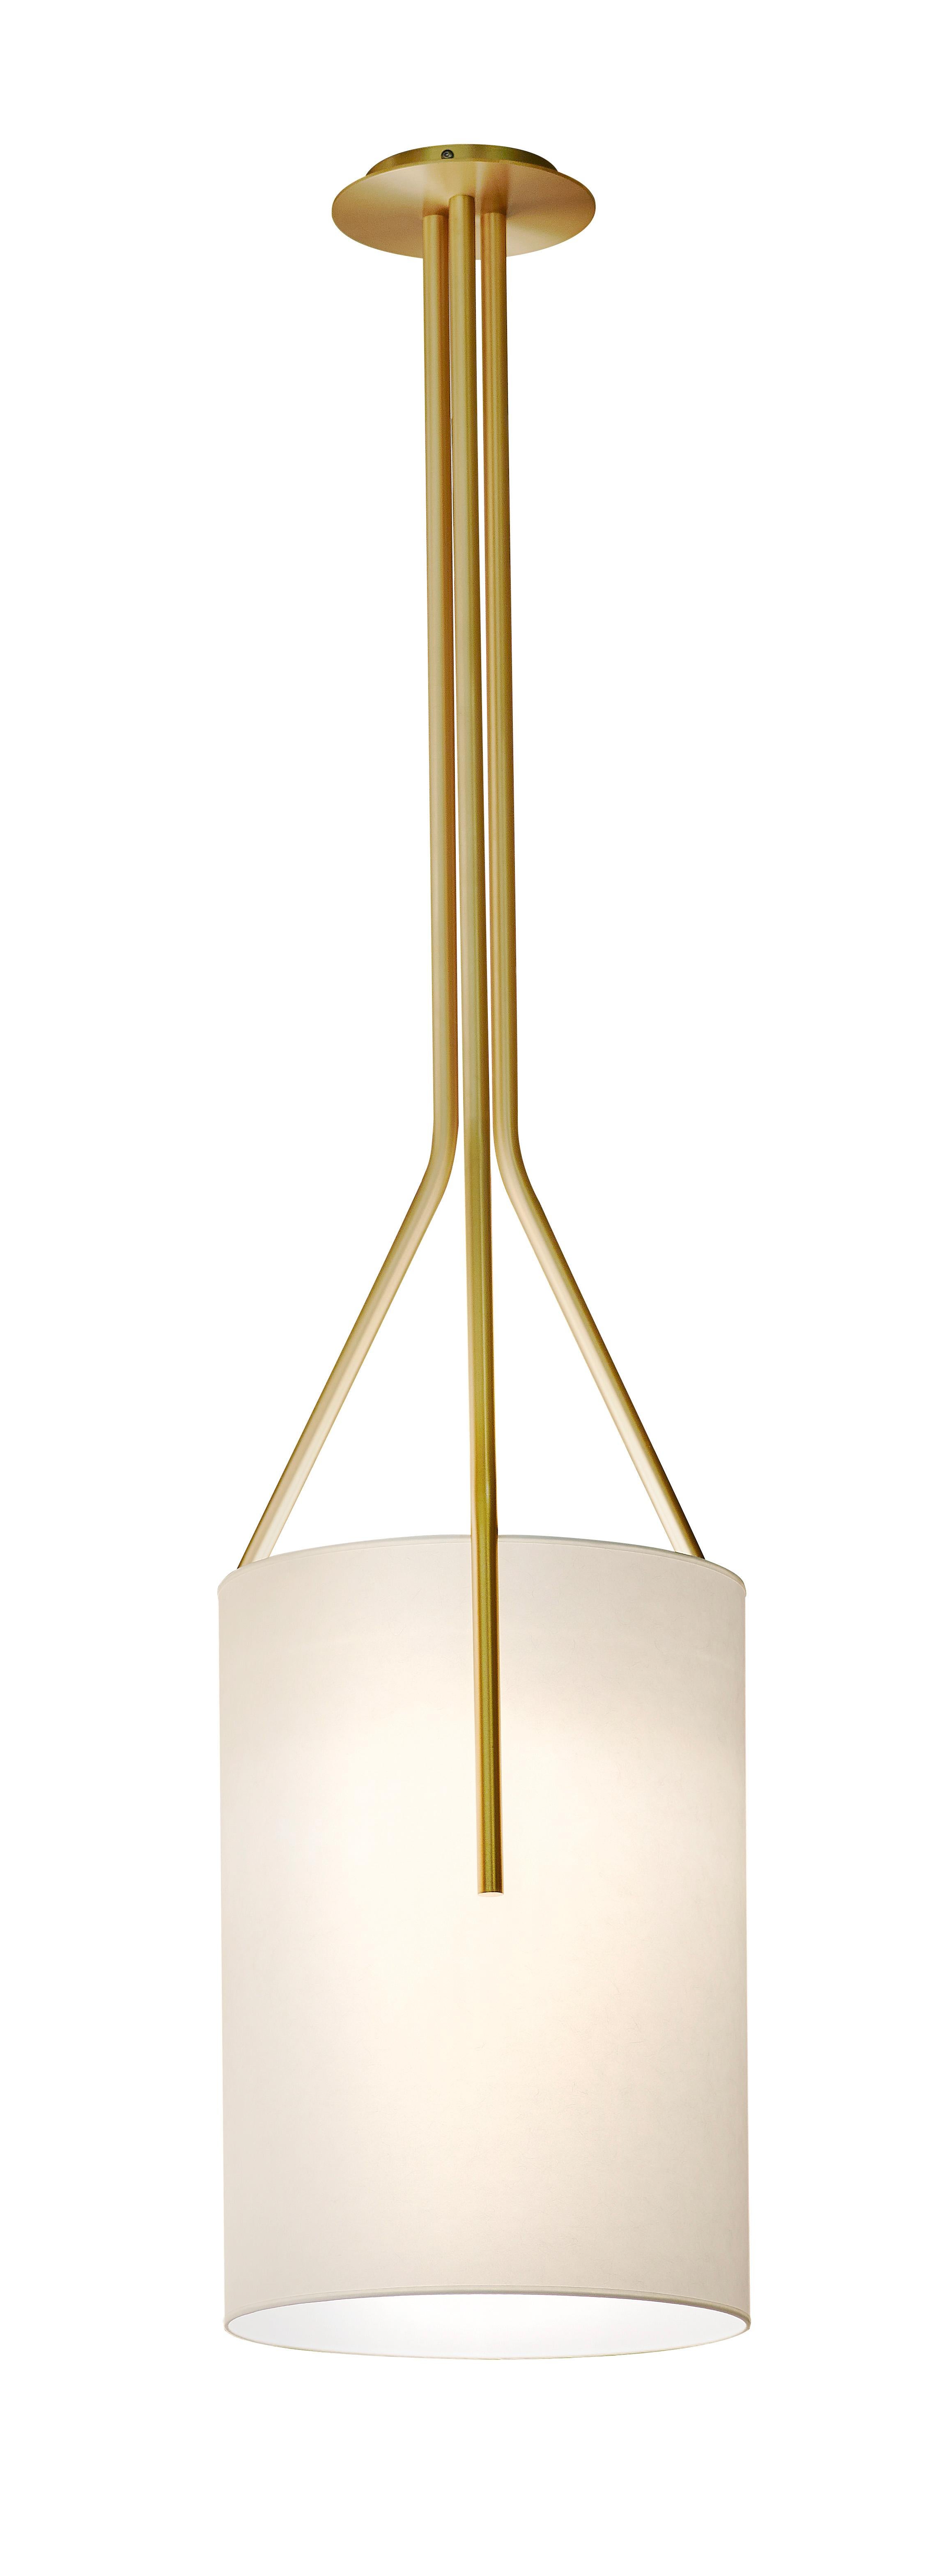 Arborescence S satin brass pendant by Hervé Langlais
Dimensions: D33 X H150 cm
Materials: solid brass, lampshade drop paper® m1, black textile cable (2m).
Others finishes and dimensions are available.

All our lamps can be wired according to